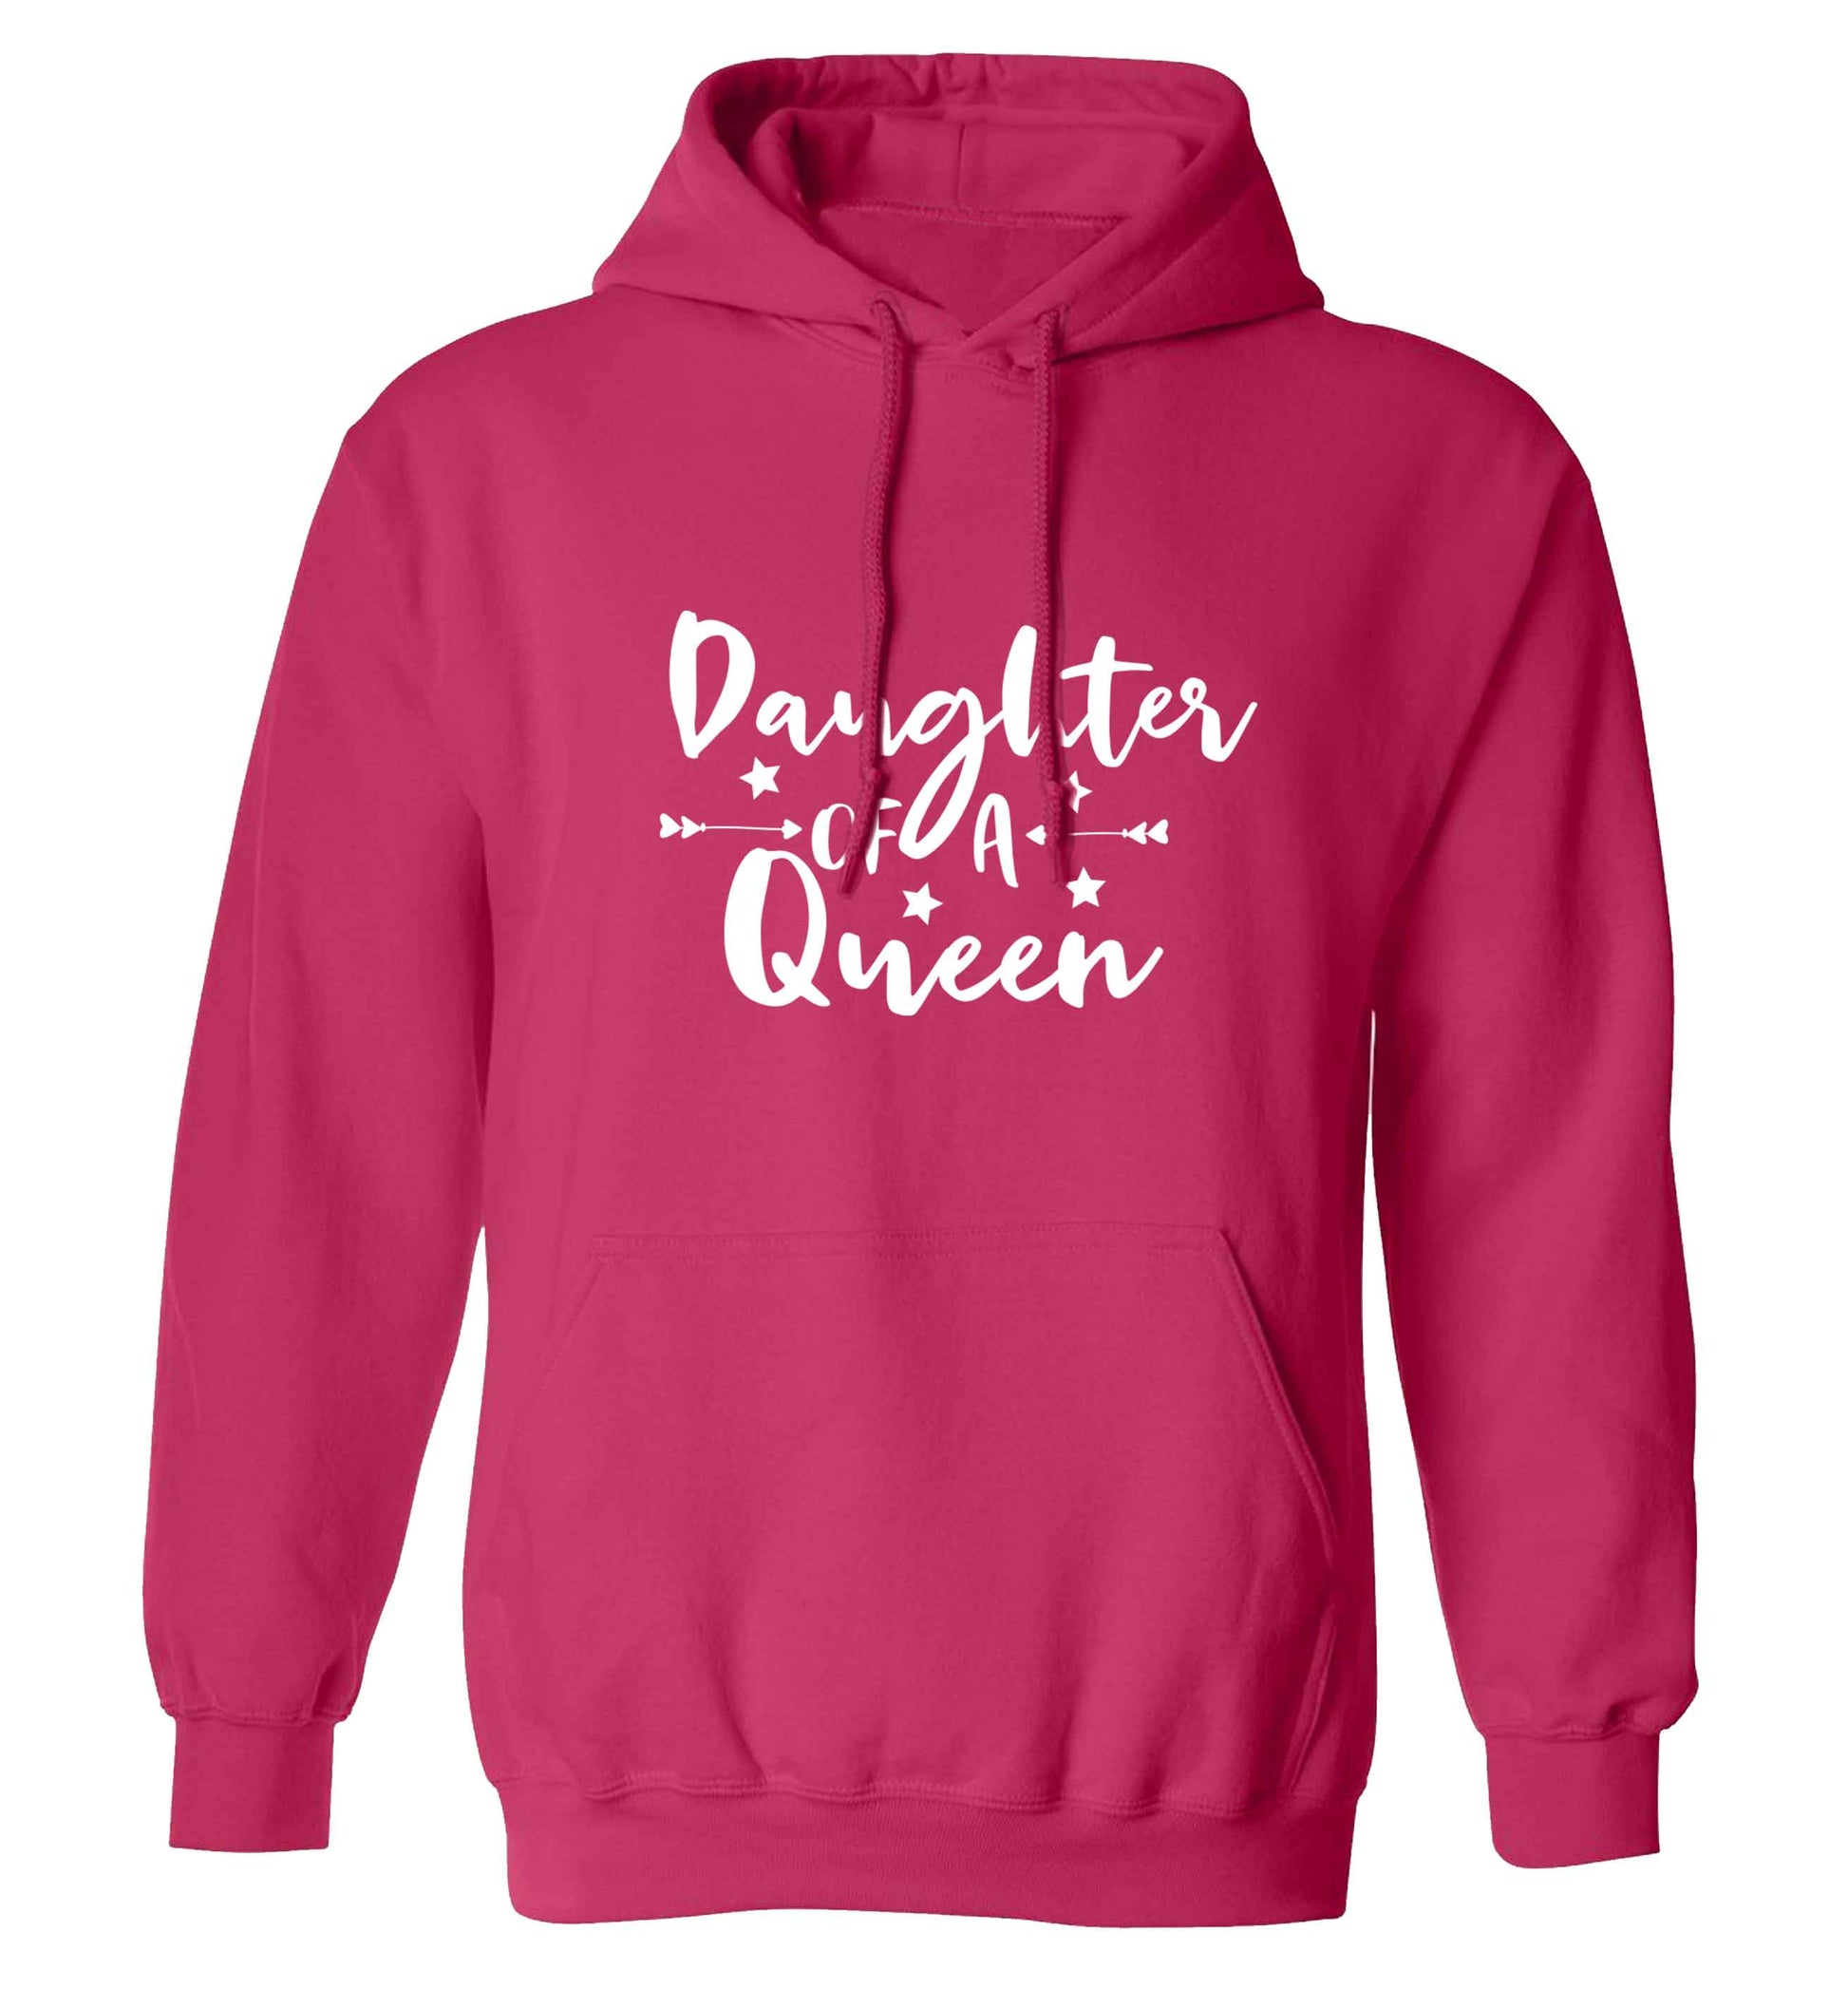 Daughter of a Queen adults unisex pink hoodie 2XL